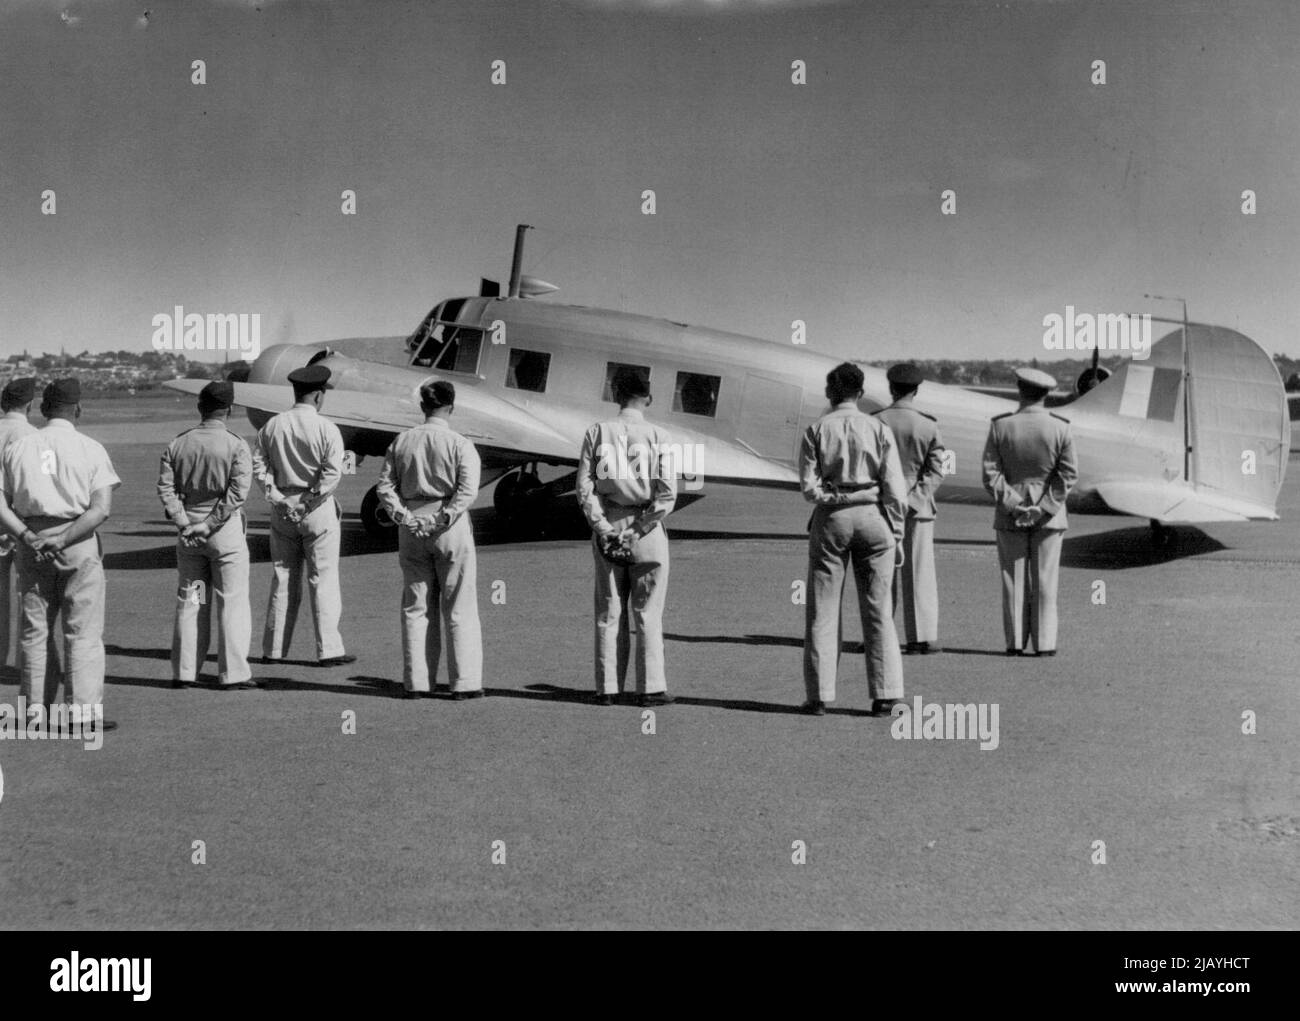 Duke of Gloucester ***** ready for take-off for Tamworth, watched by guard formed from RAAF unit stationed at Mascot. April 11, 1946. (Photo by Hood) Stock Photo